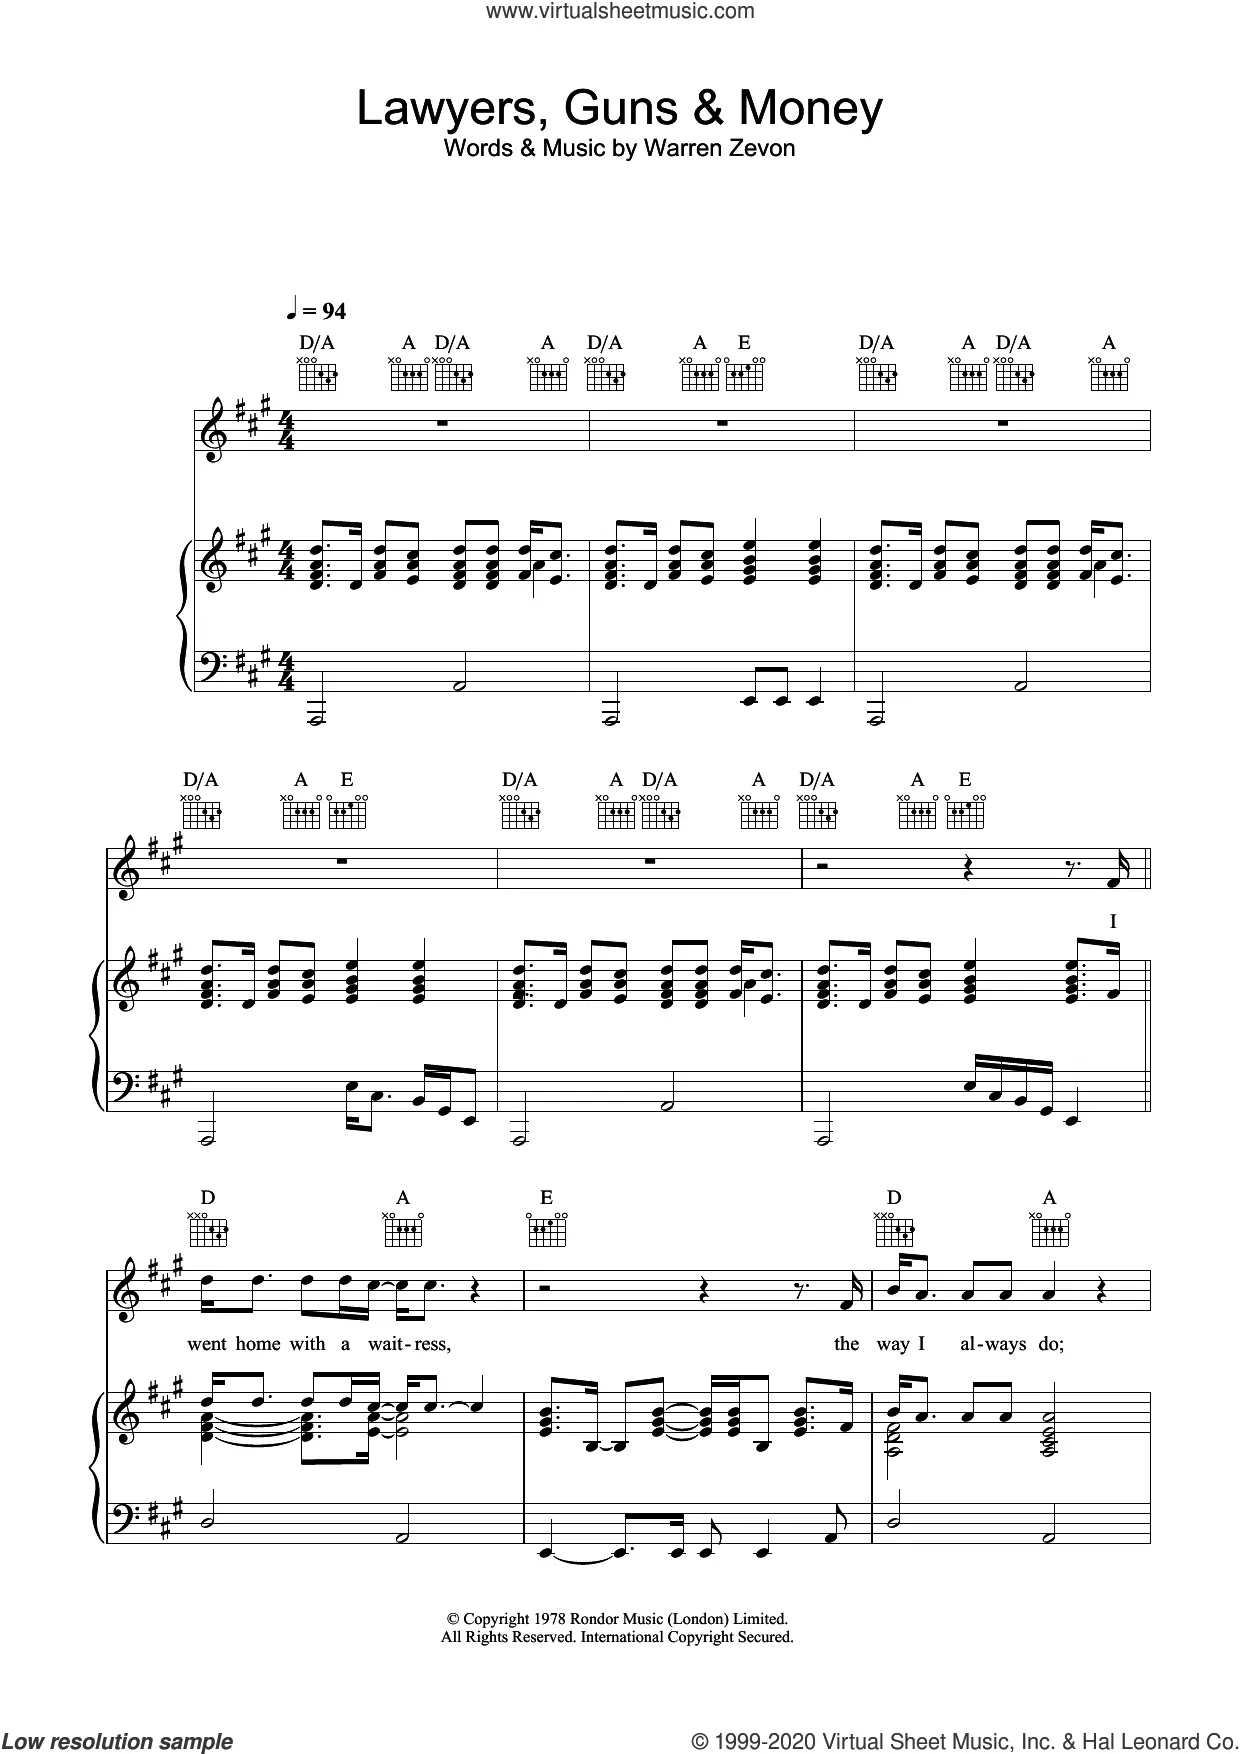 Werewolves of London Sheet Music - 8 Arrangements Available Instantly -  Musicnotes